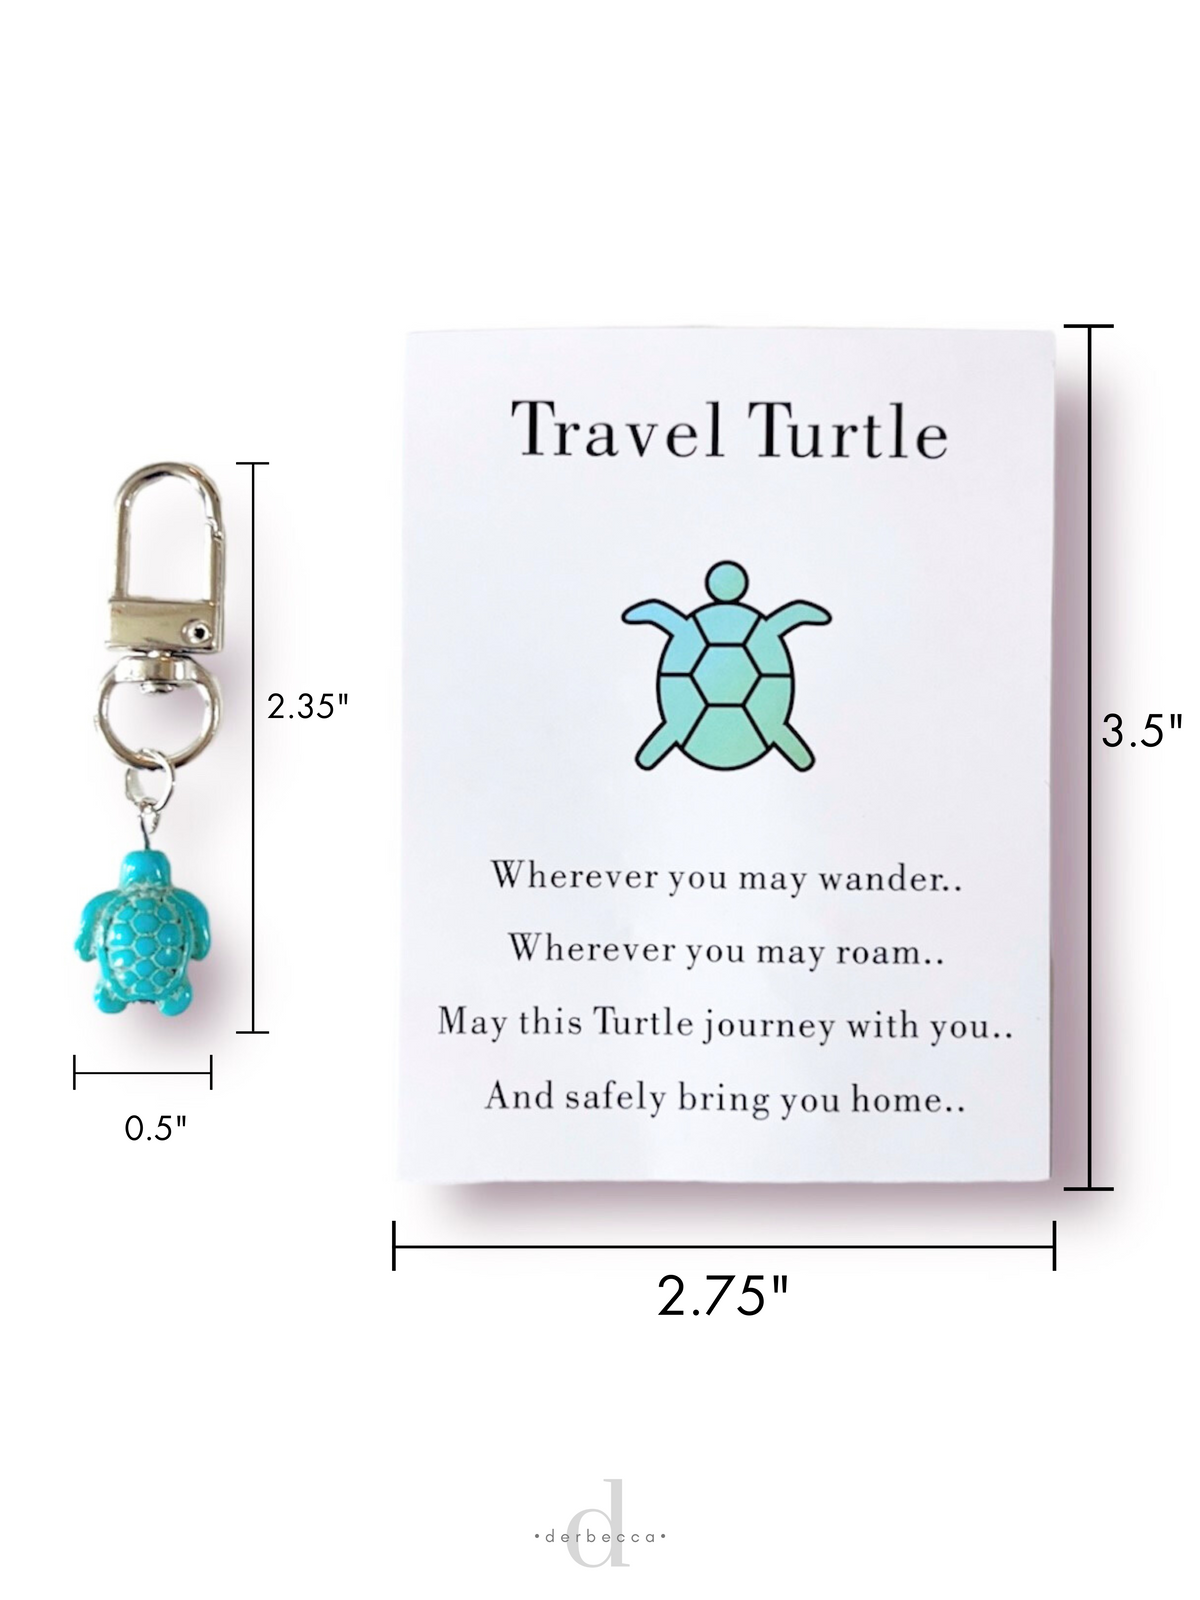 Travel Turtle Mini Keychain Bag Charm Zipper Pull Clip Charm Turquoise Turtle with Poem Saying Card included